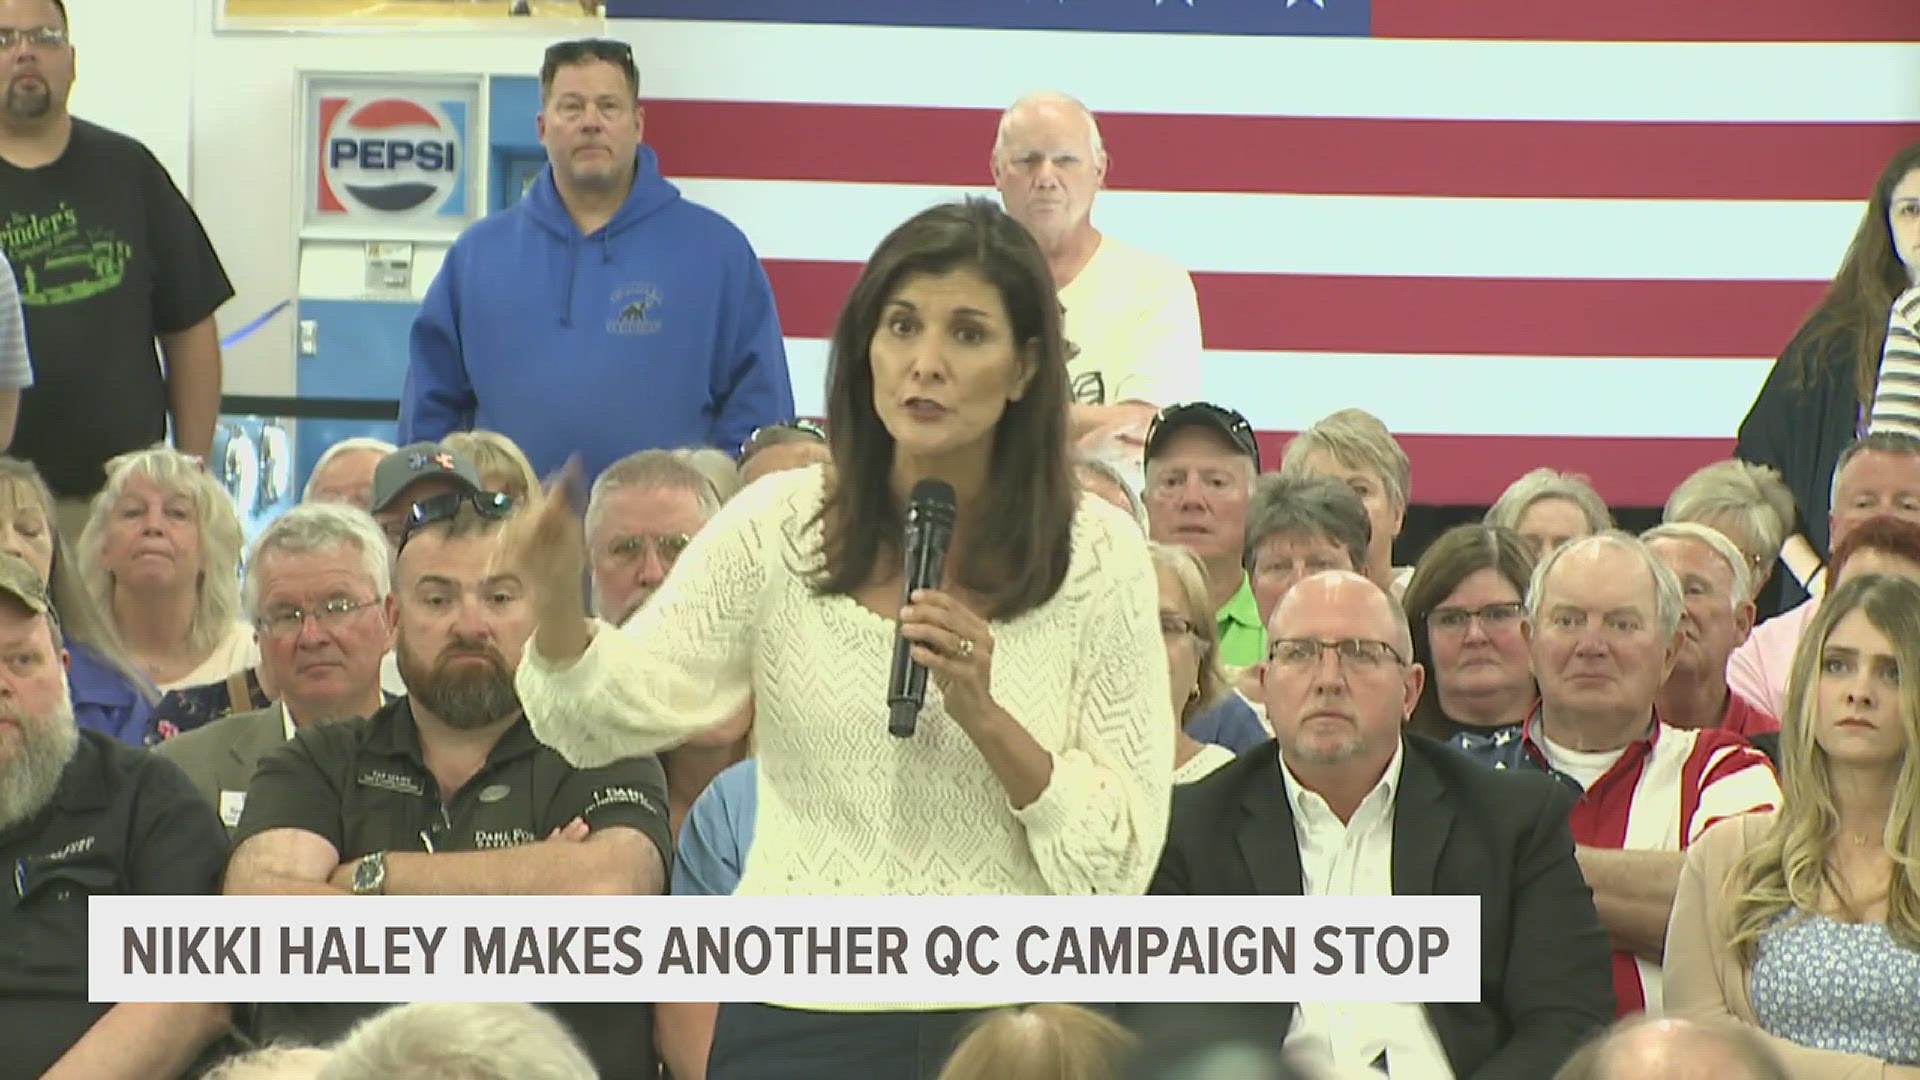 The election is still 19 months away, but voters are already paying attention as Haley makes her 22nd campaign stop in Iowa already.